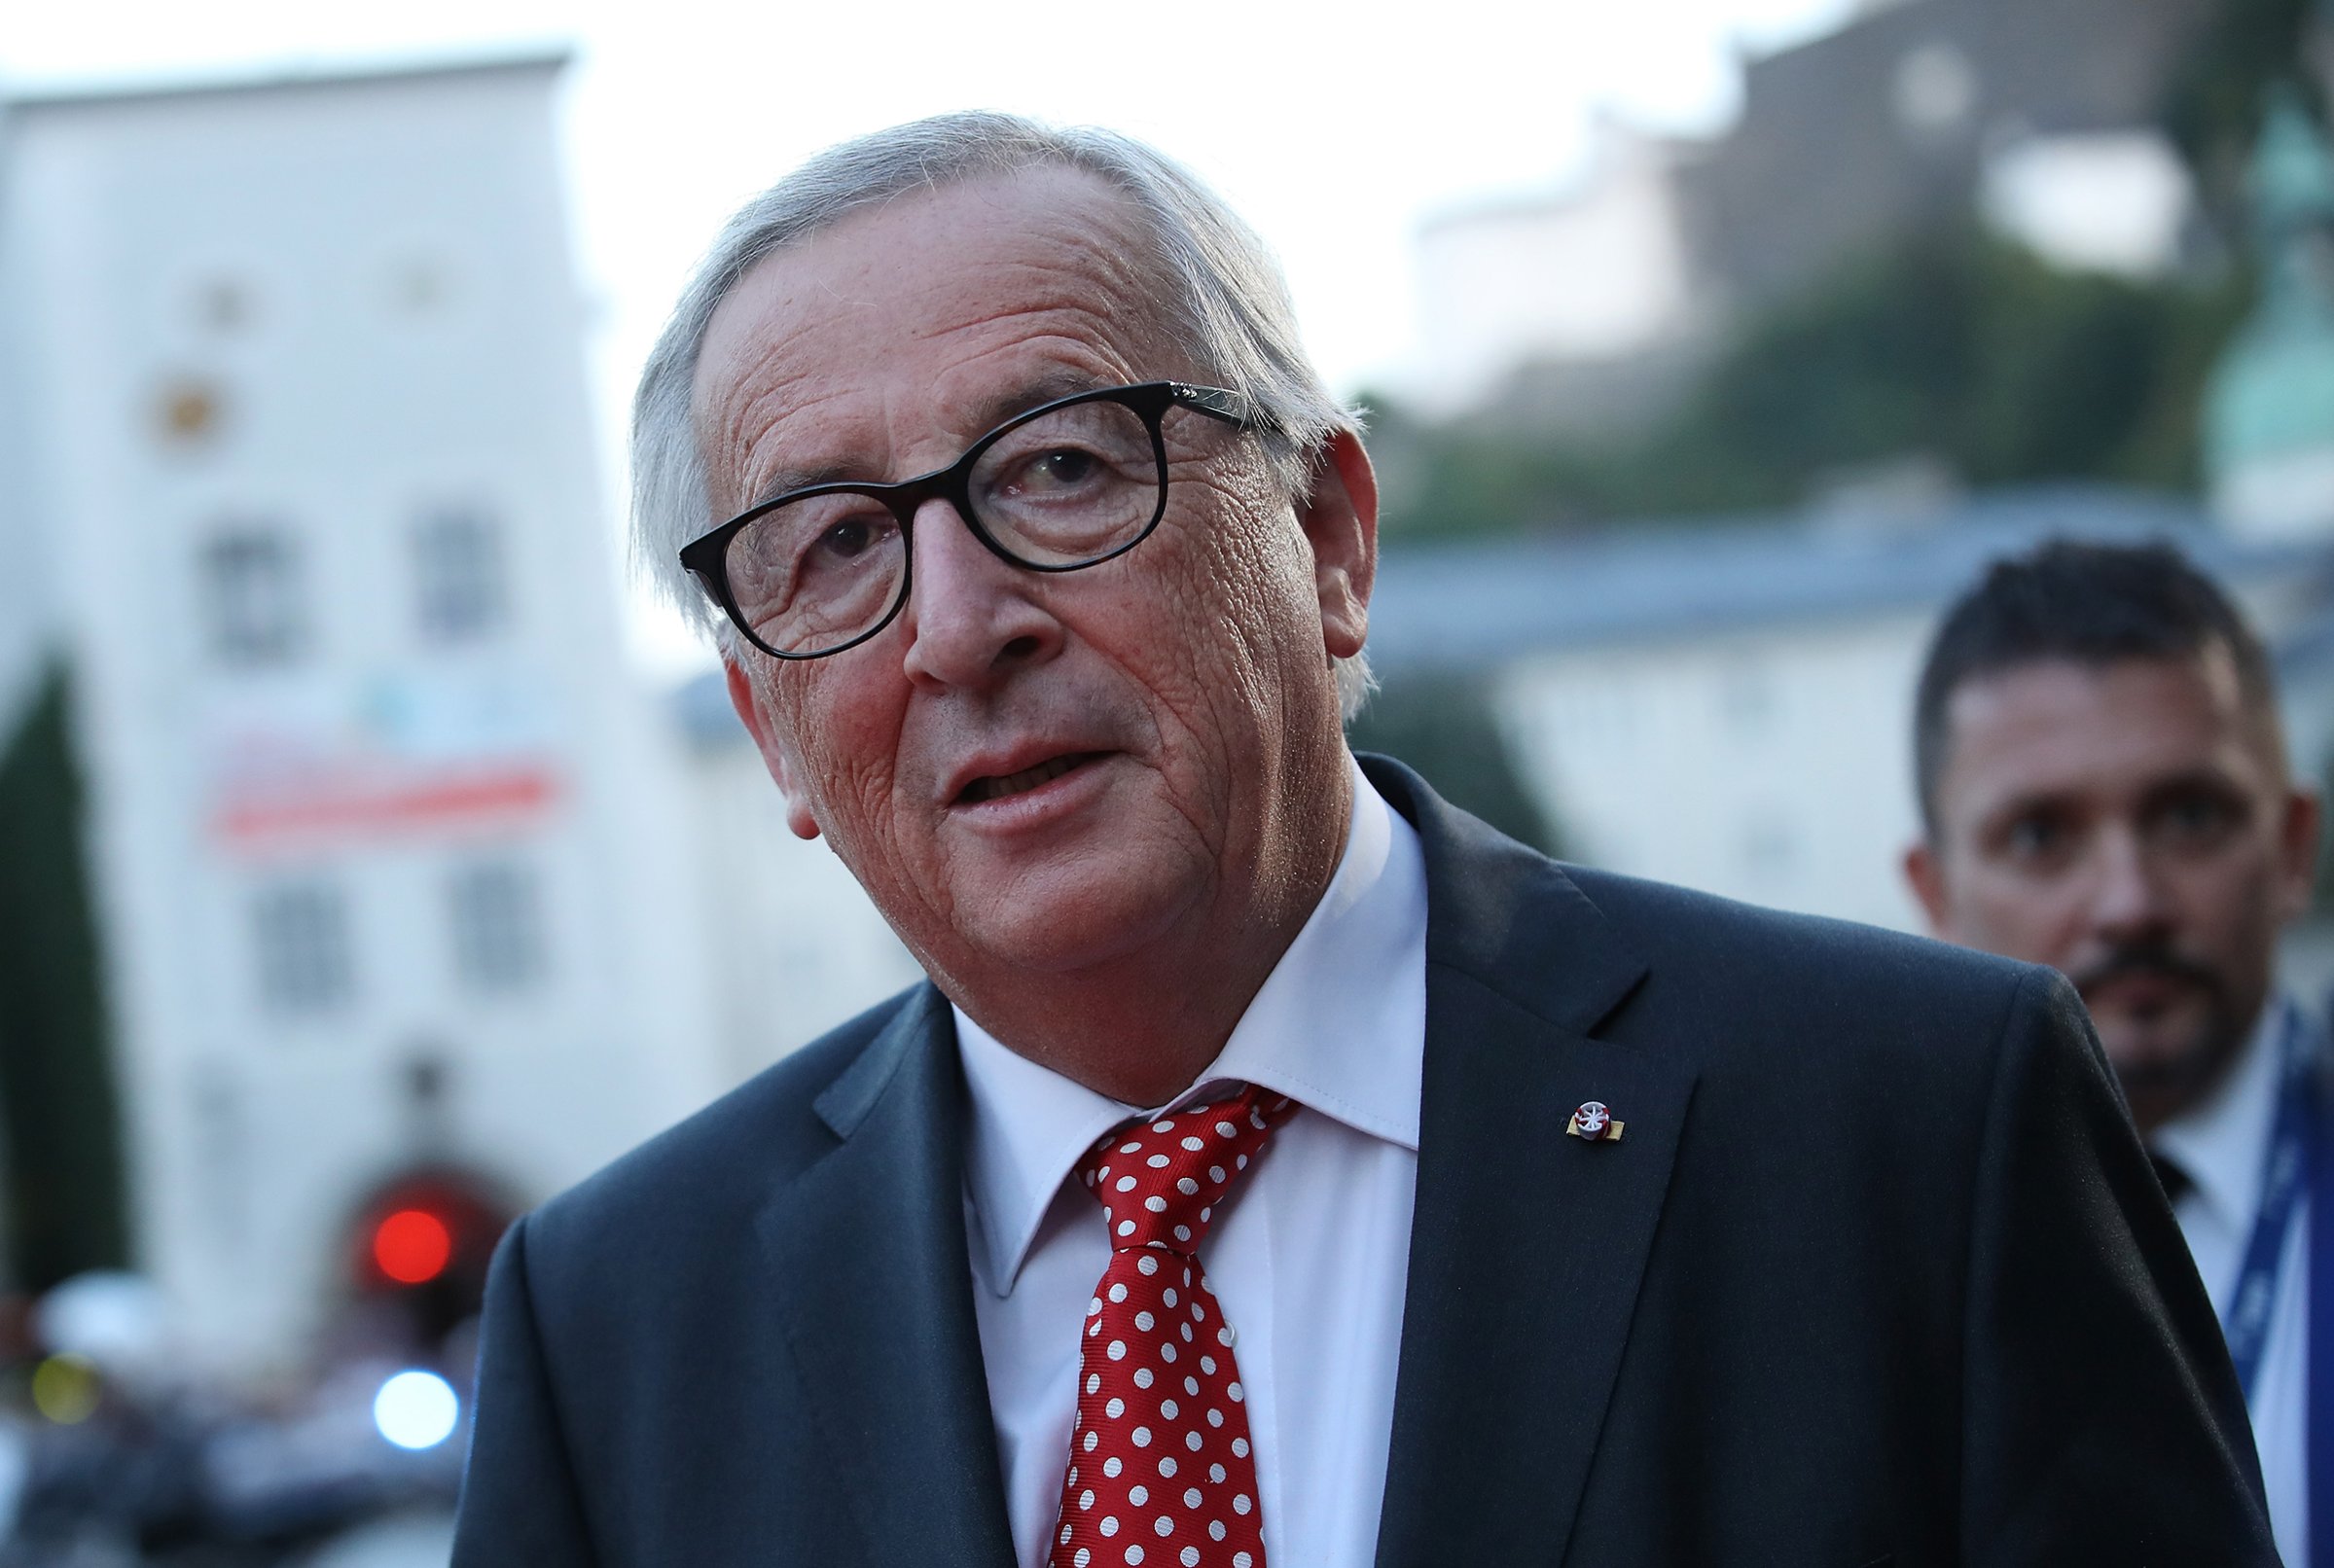 Jean-Claude Juncker, President of the European Commission, arrives at an informal summit of leaders of the European Union on September 19, 2018 in Salzburg, Austria. High on the agenda of the two-day summit is migration policy.